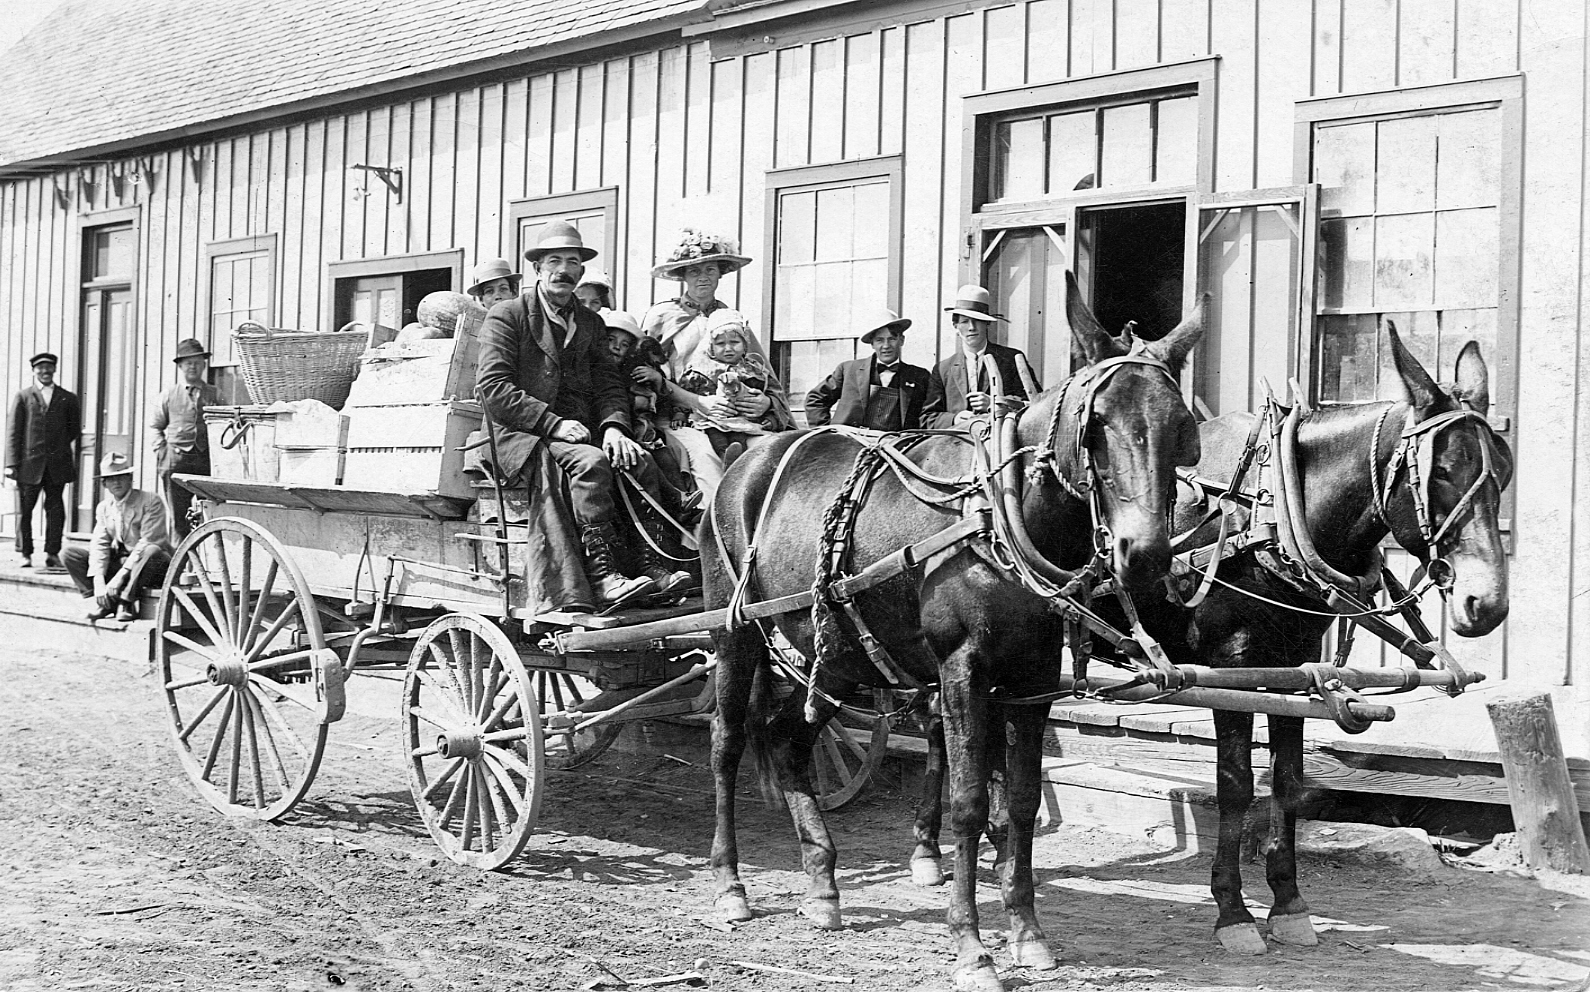  James Dodge family shortly after arriving in Lethbridge in front of the train station. 1913. Galt Archives 19841022000 